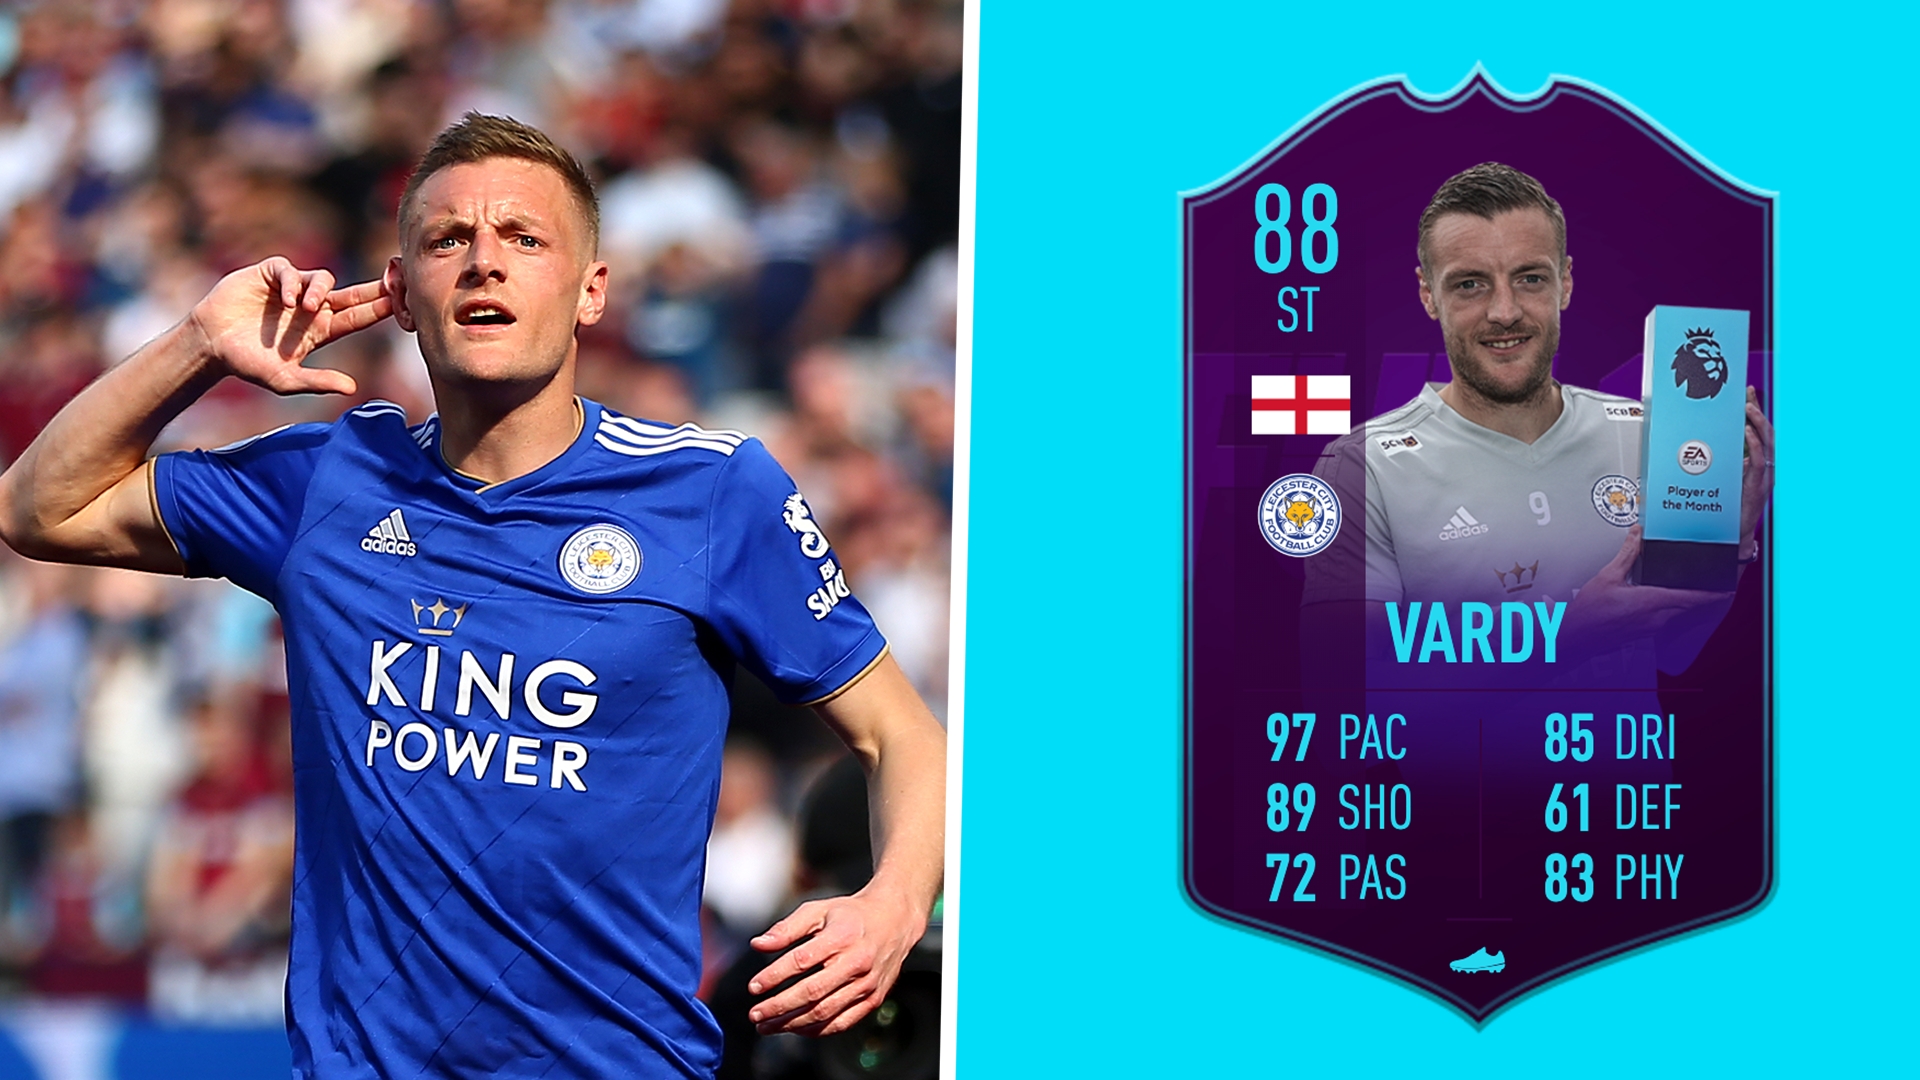 aflevere Præstation dechifrere FIFA 19 Jamie Vardy Player of the Month SBC solutions | Goal.com